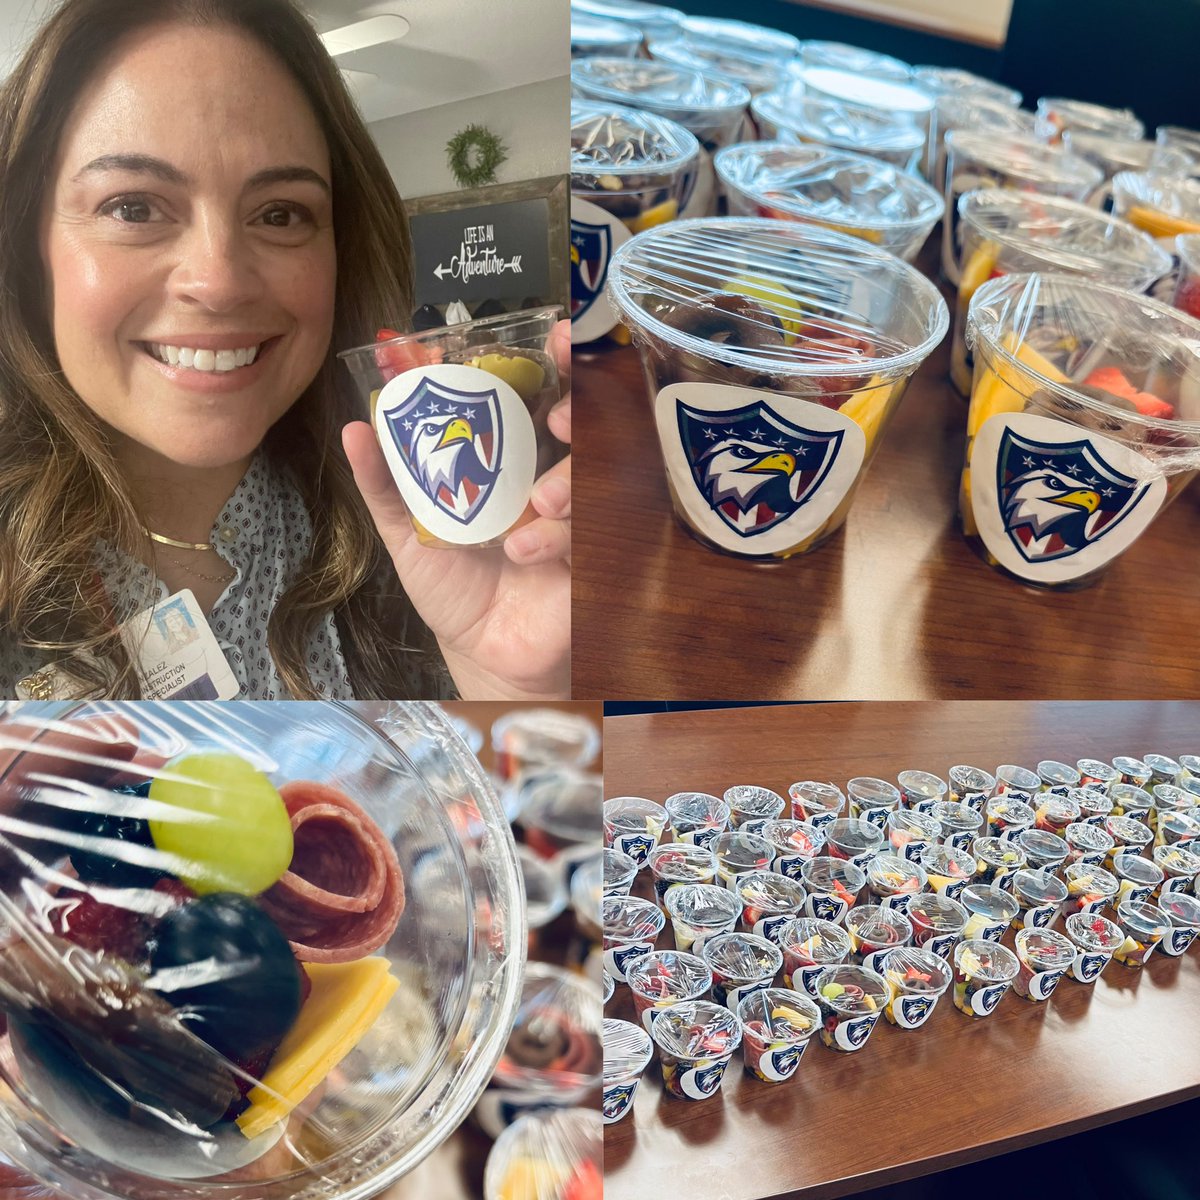 Our Gonzalez family tradition and gift to the wonderful @VMHSEagles. Made with love.🥰Heartfelt thanks to the amazing staff that continues to surround our family with so much love and support. Eagle family, always.❤️💙🦅🌟@rgonzalez1414🕊️